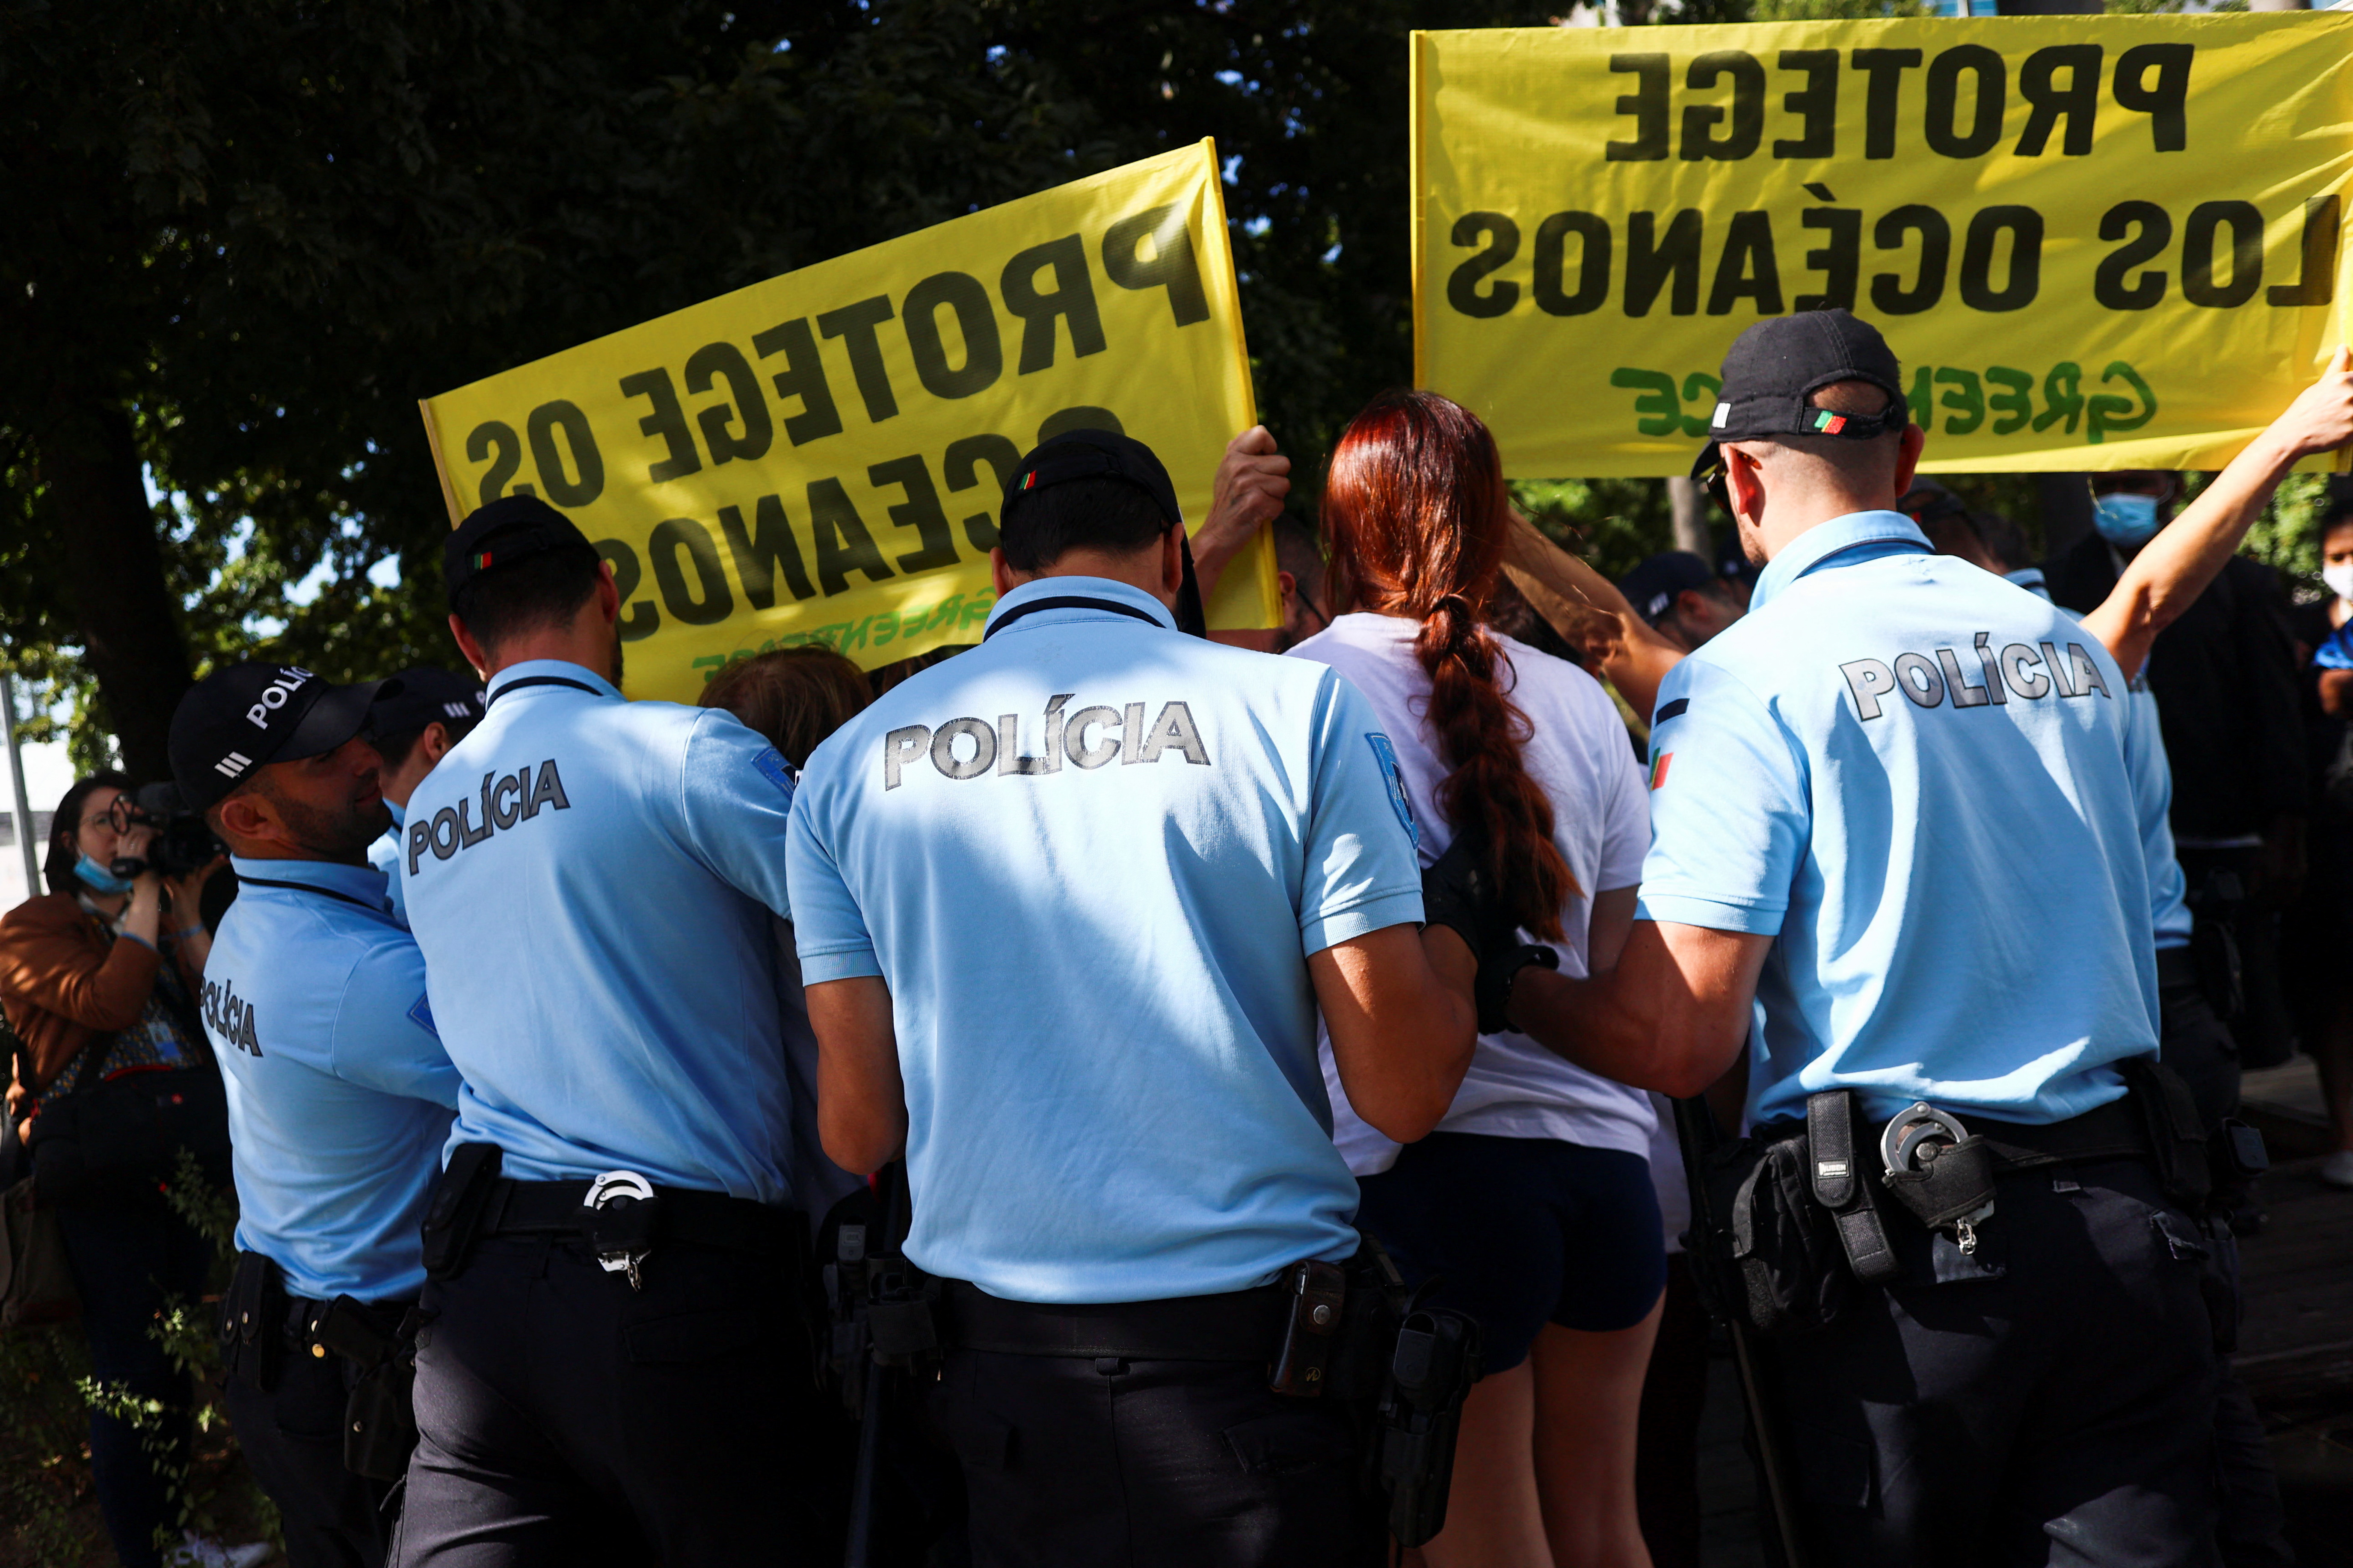 Greenpeace activists demonstrate outside the U.N. Ocean Conference in Lisbon